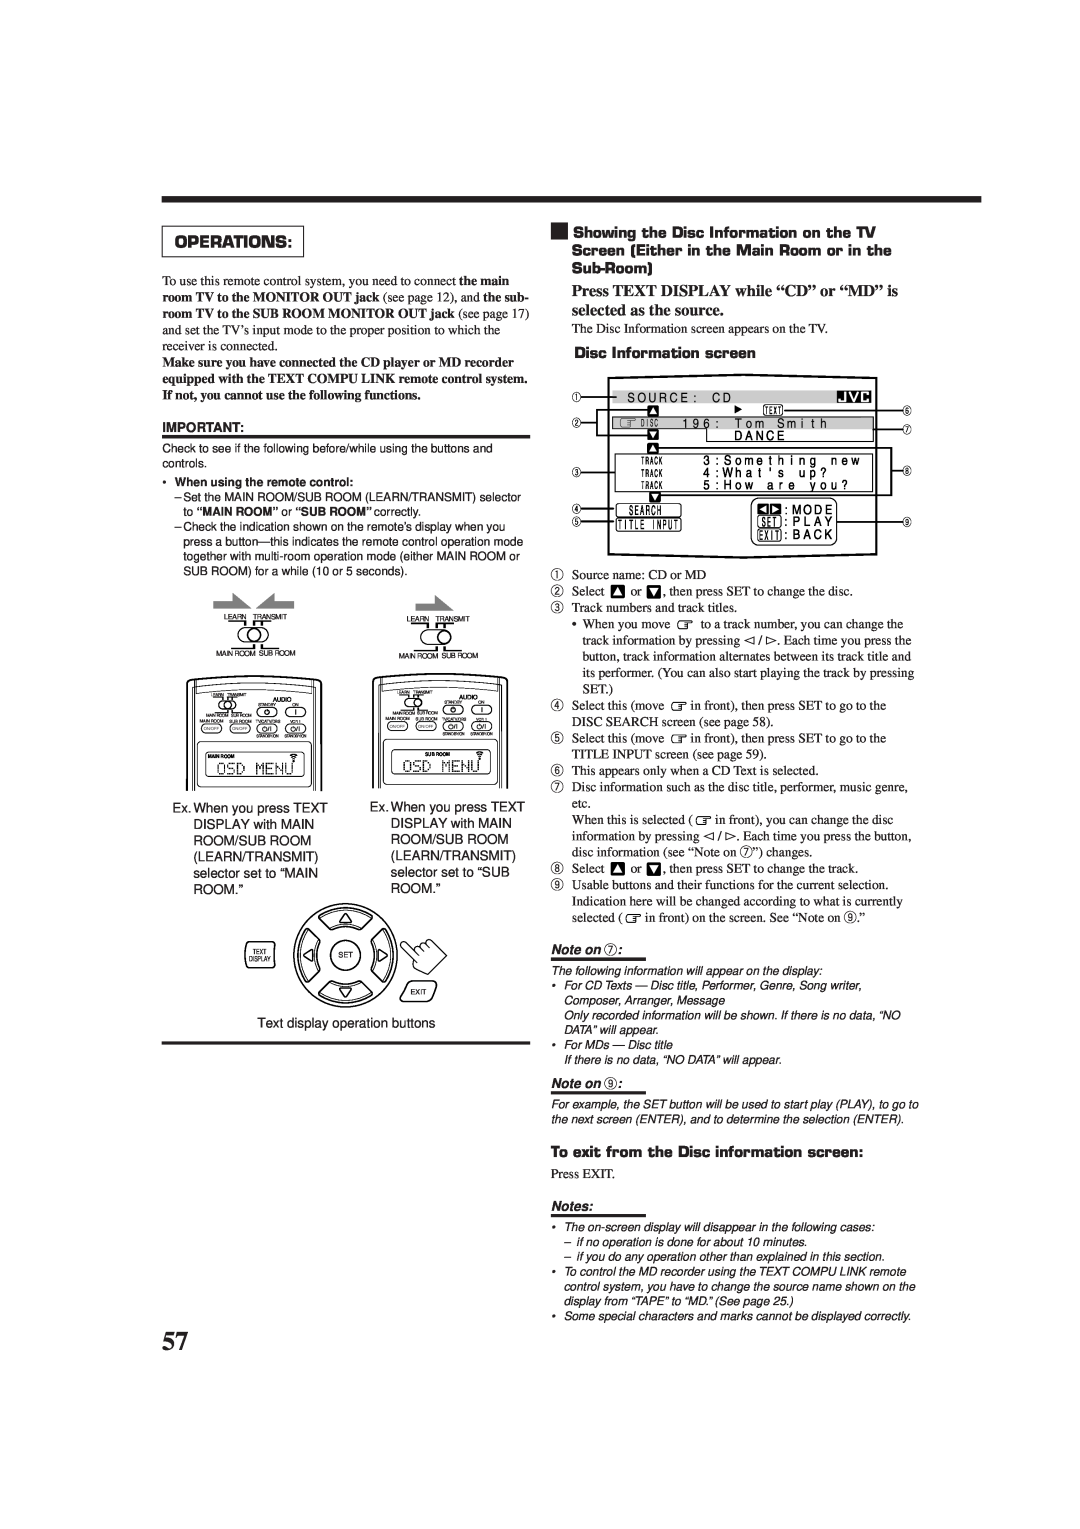 JVC RX-DP10VBK manual Operations, Disc Information screen, To exit from the Disc information screen, Note on, Notes 